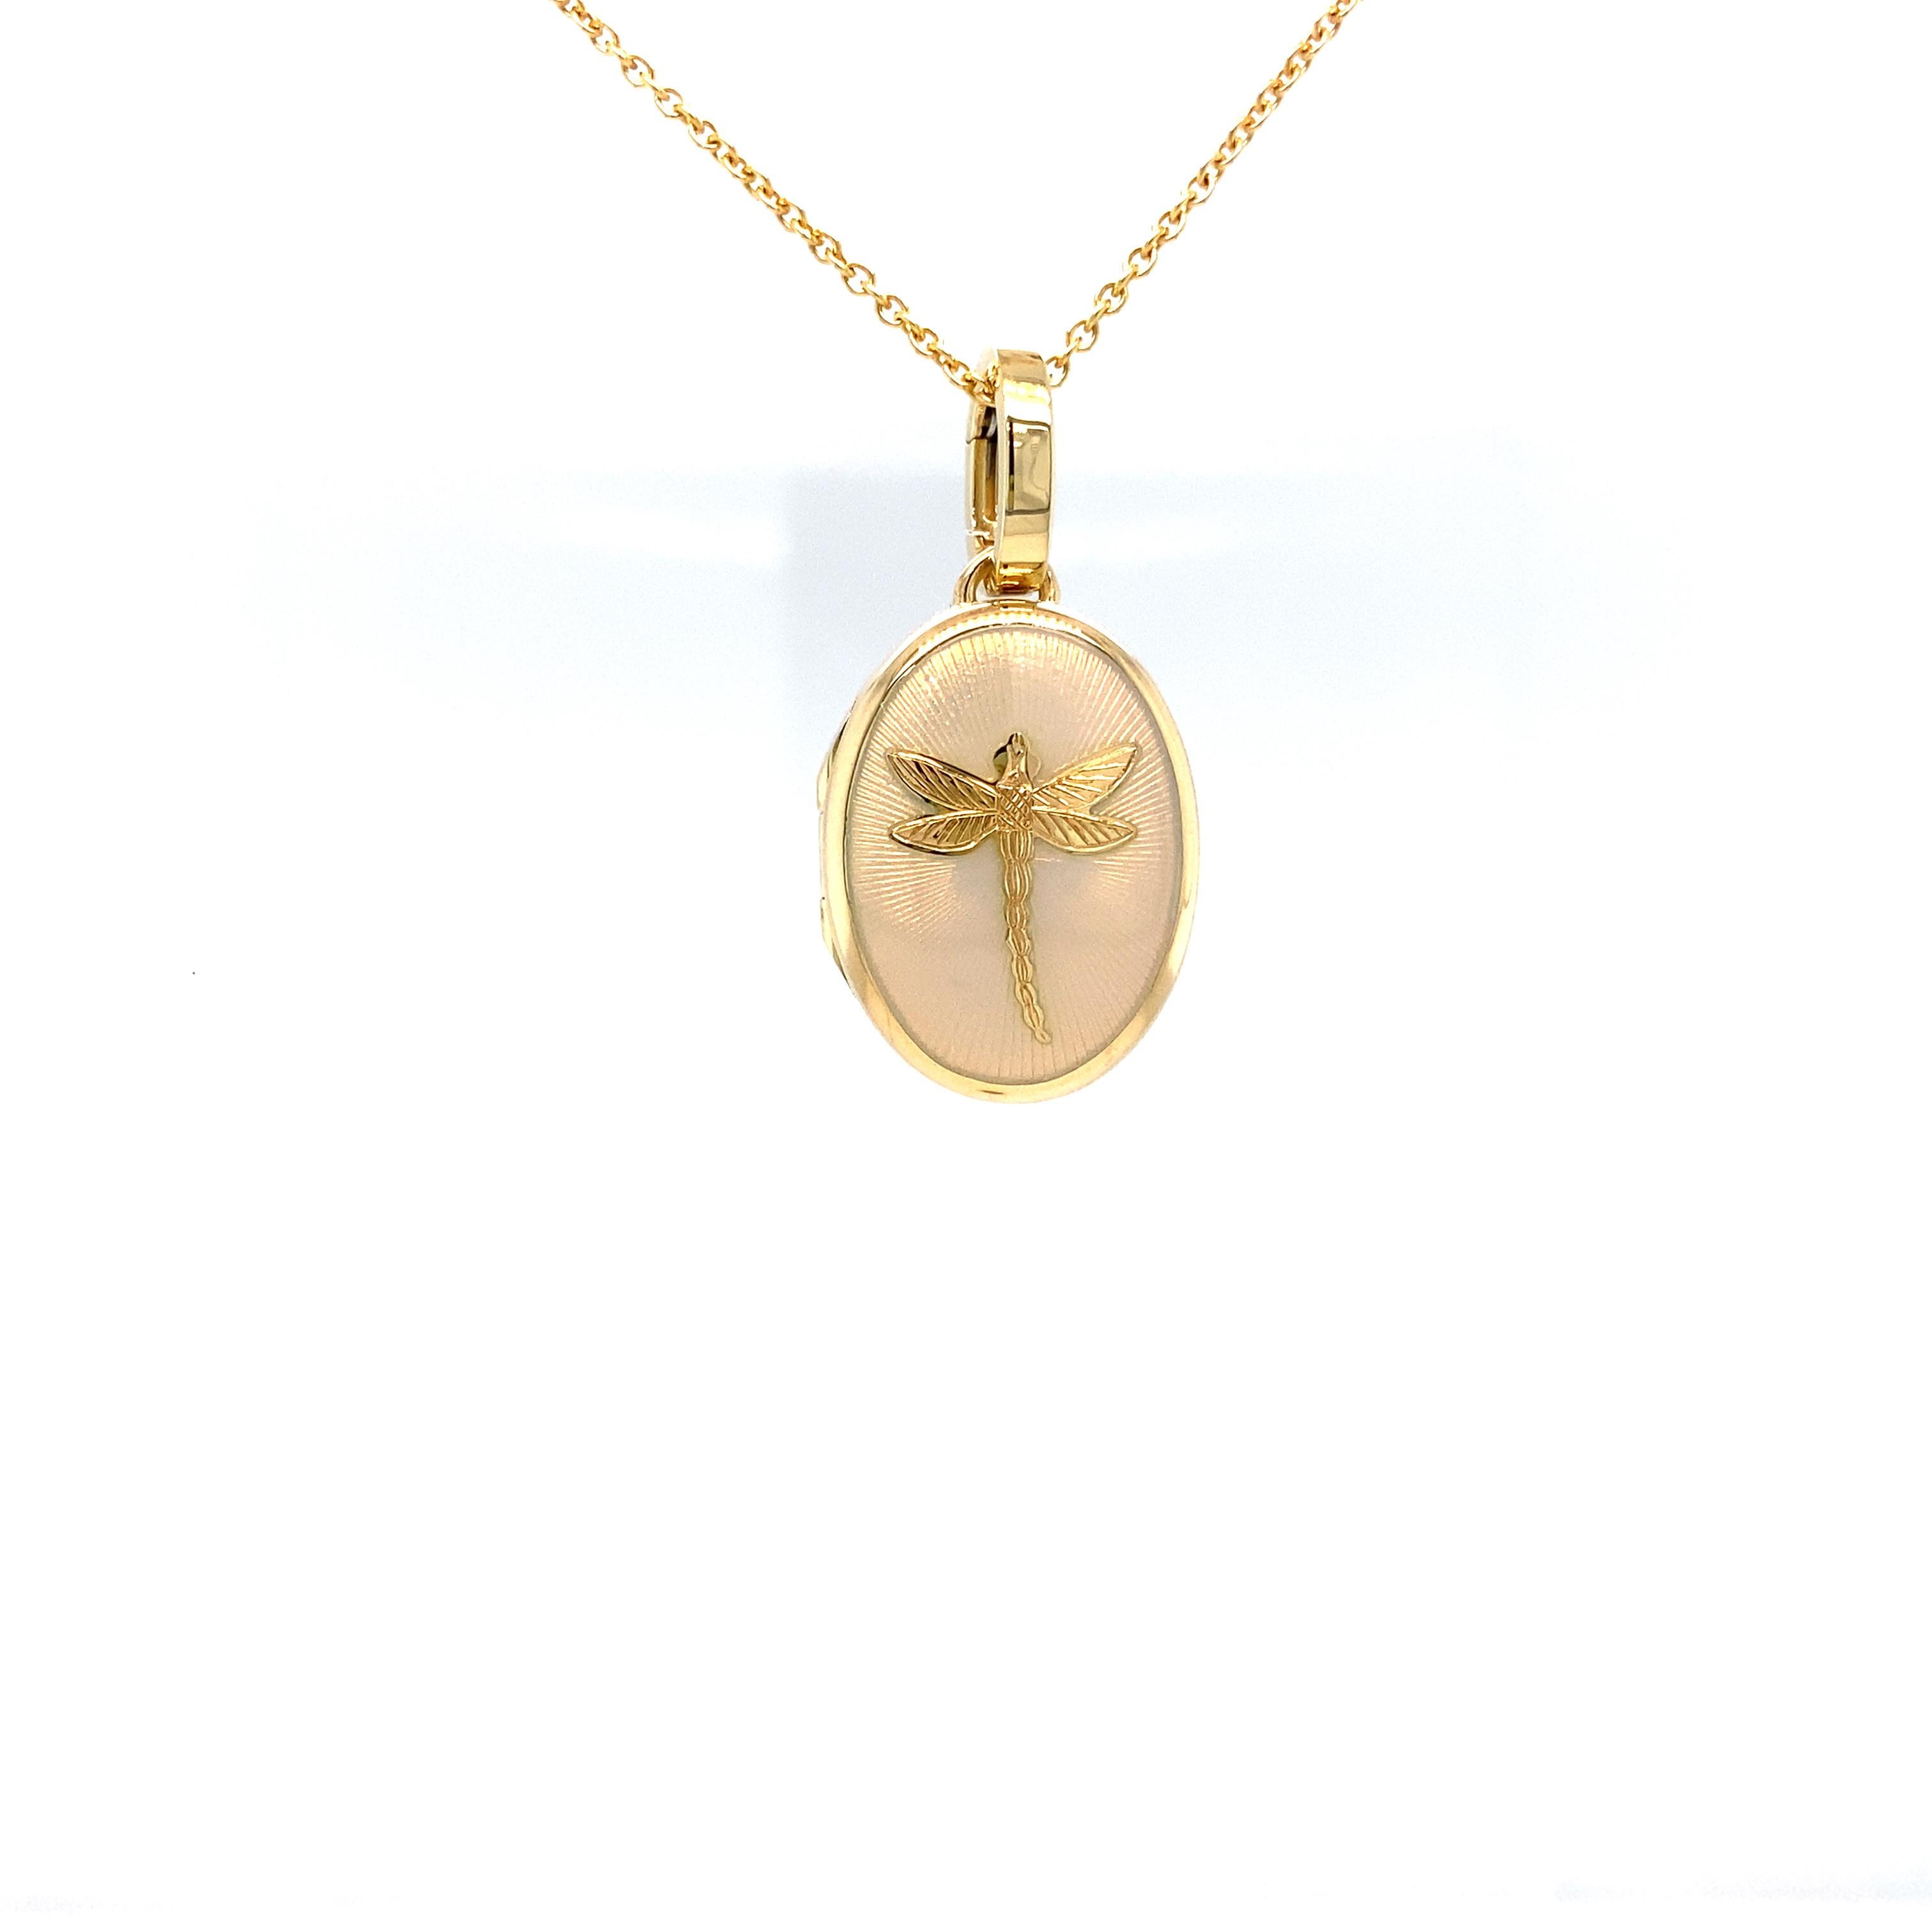 Oval Locket Pendant Necklace Dragonfly 18k Yellow Gold White Guilloche Enamel For Sale 2